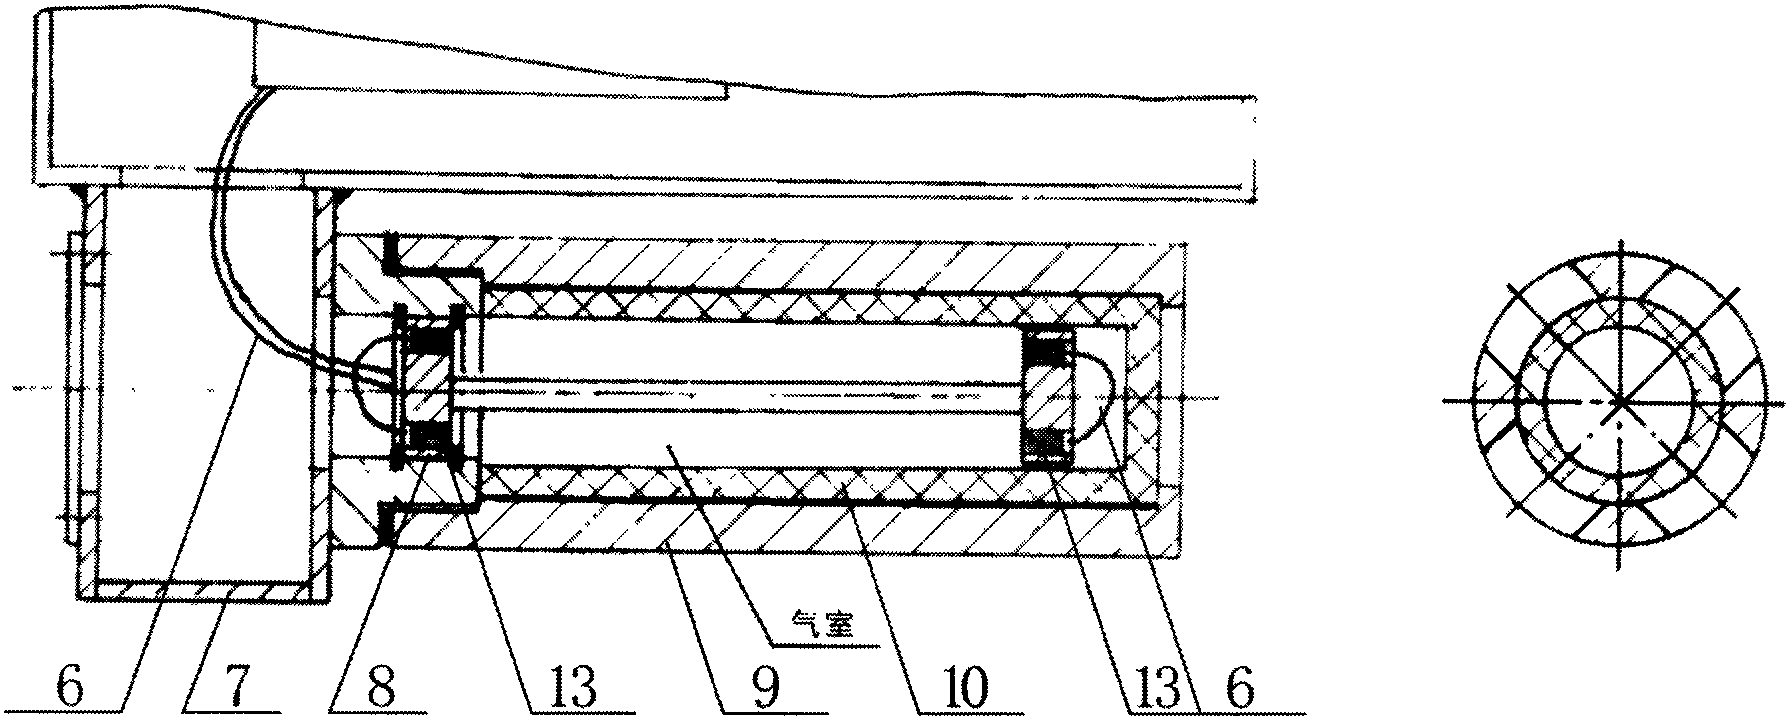 Portable optical-fiber-sensing apparatus for detecting concentration of flammable and explosive gases and hazardous gases